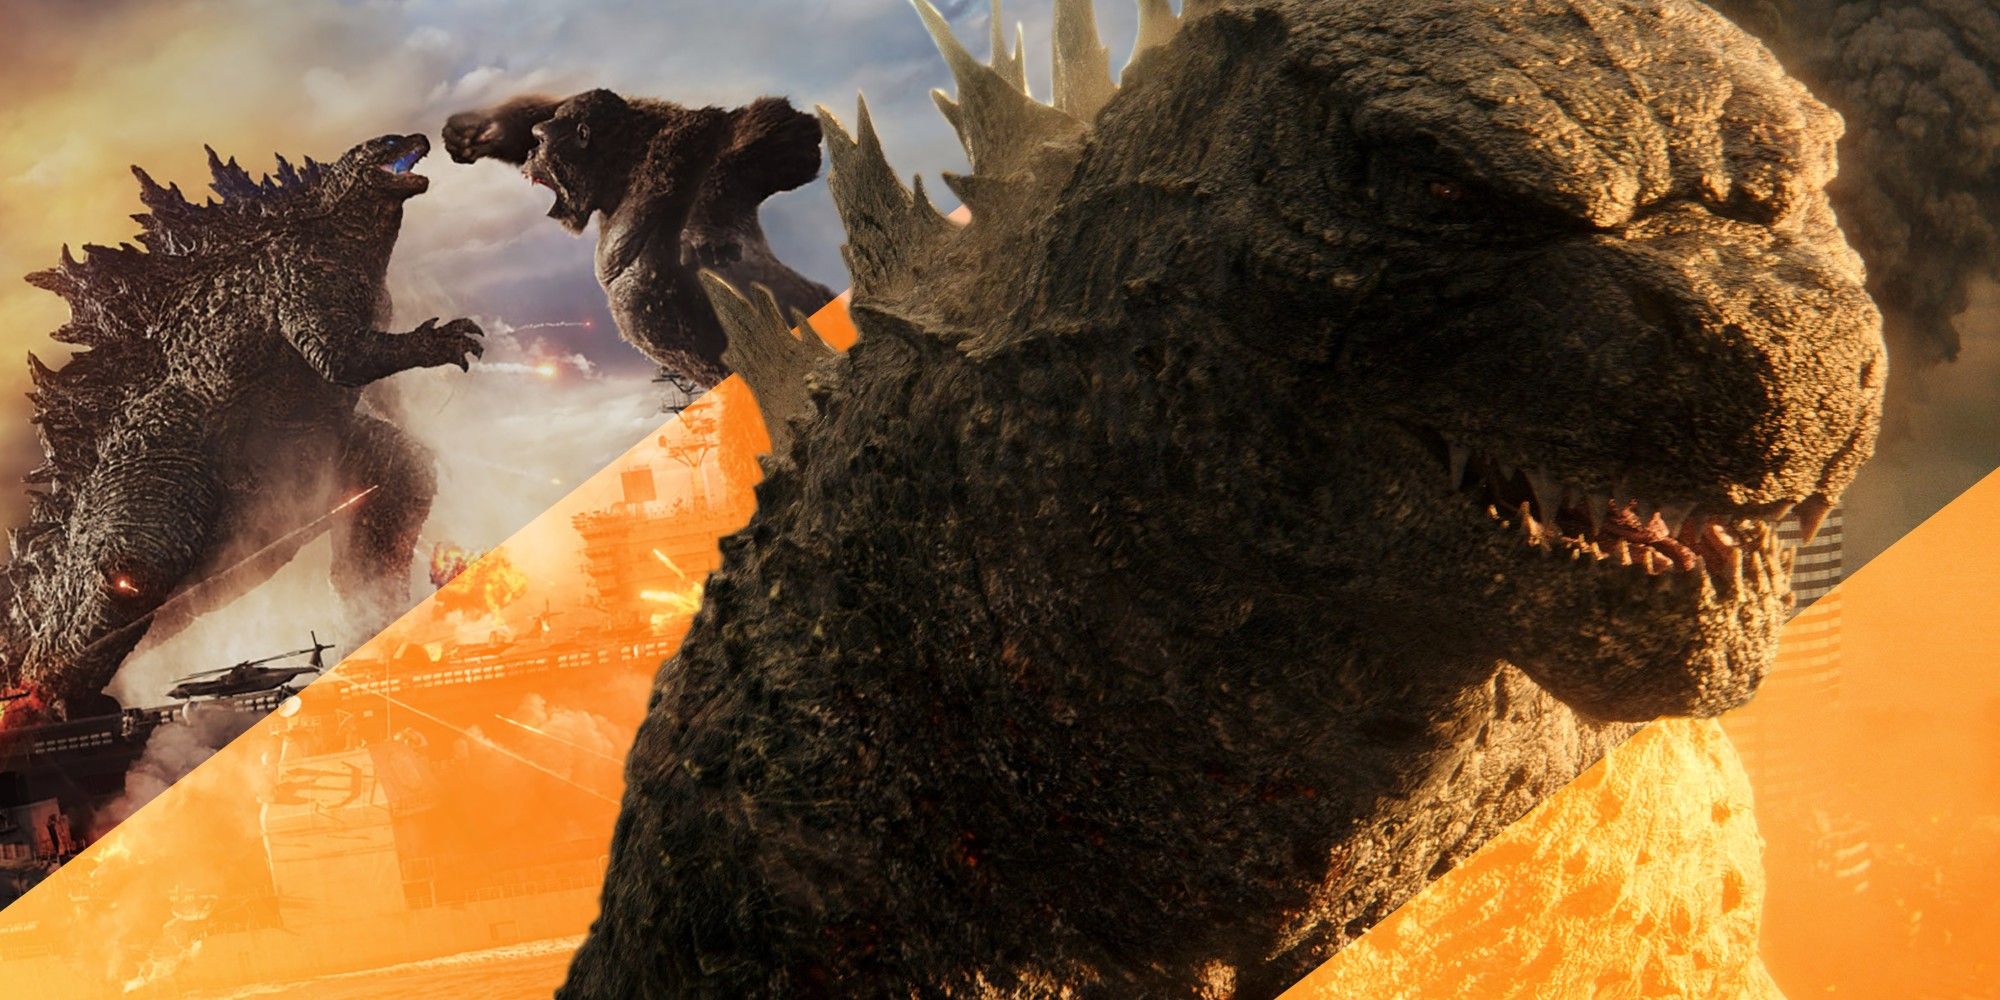 Why Godzilla Was Missing For Three Years Before GvK&#8217;s Events